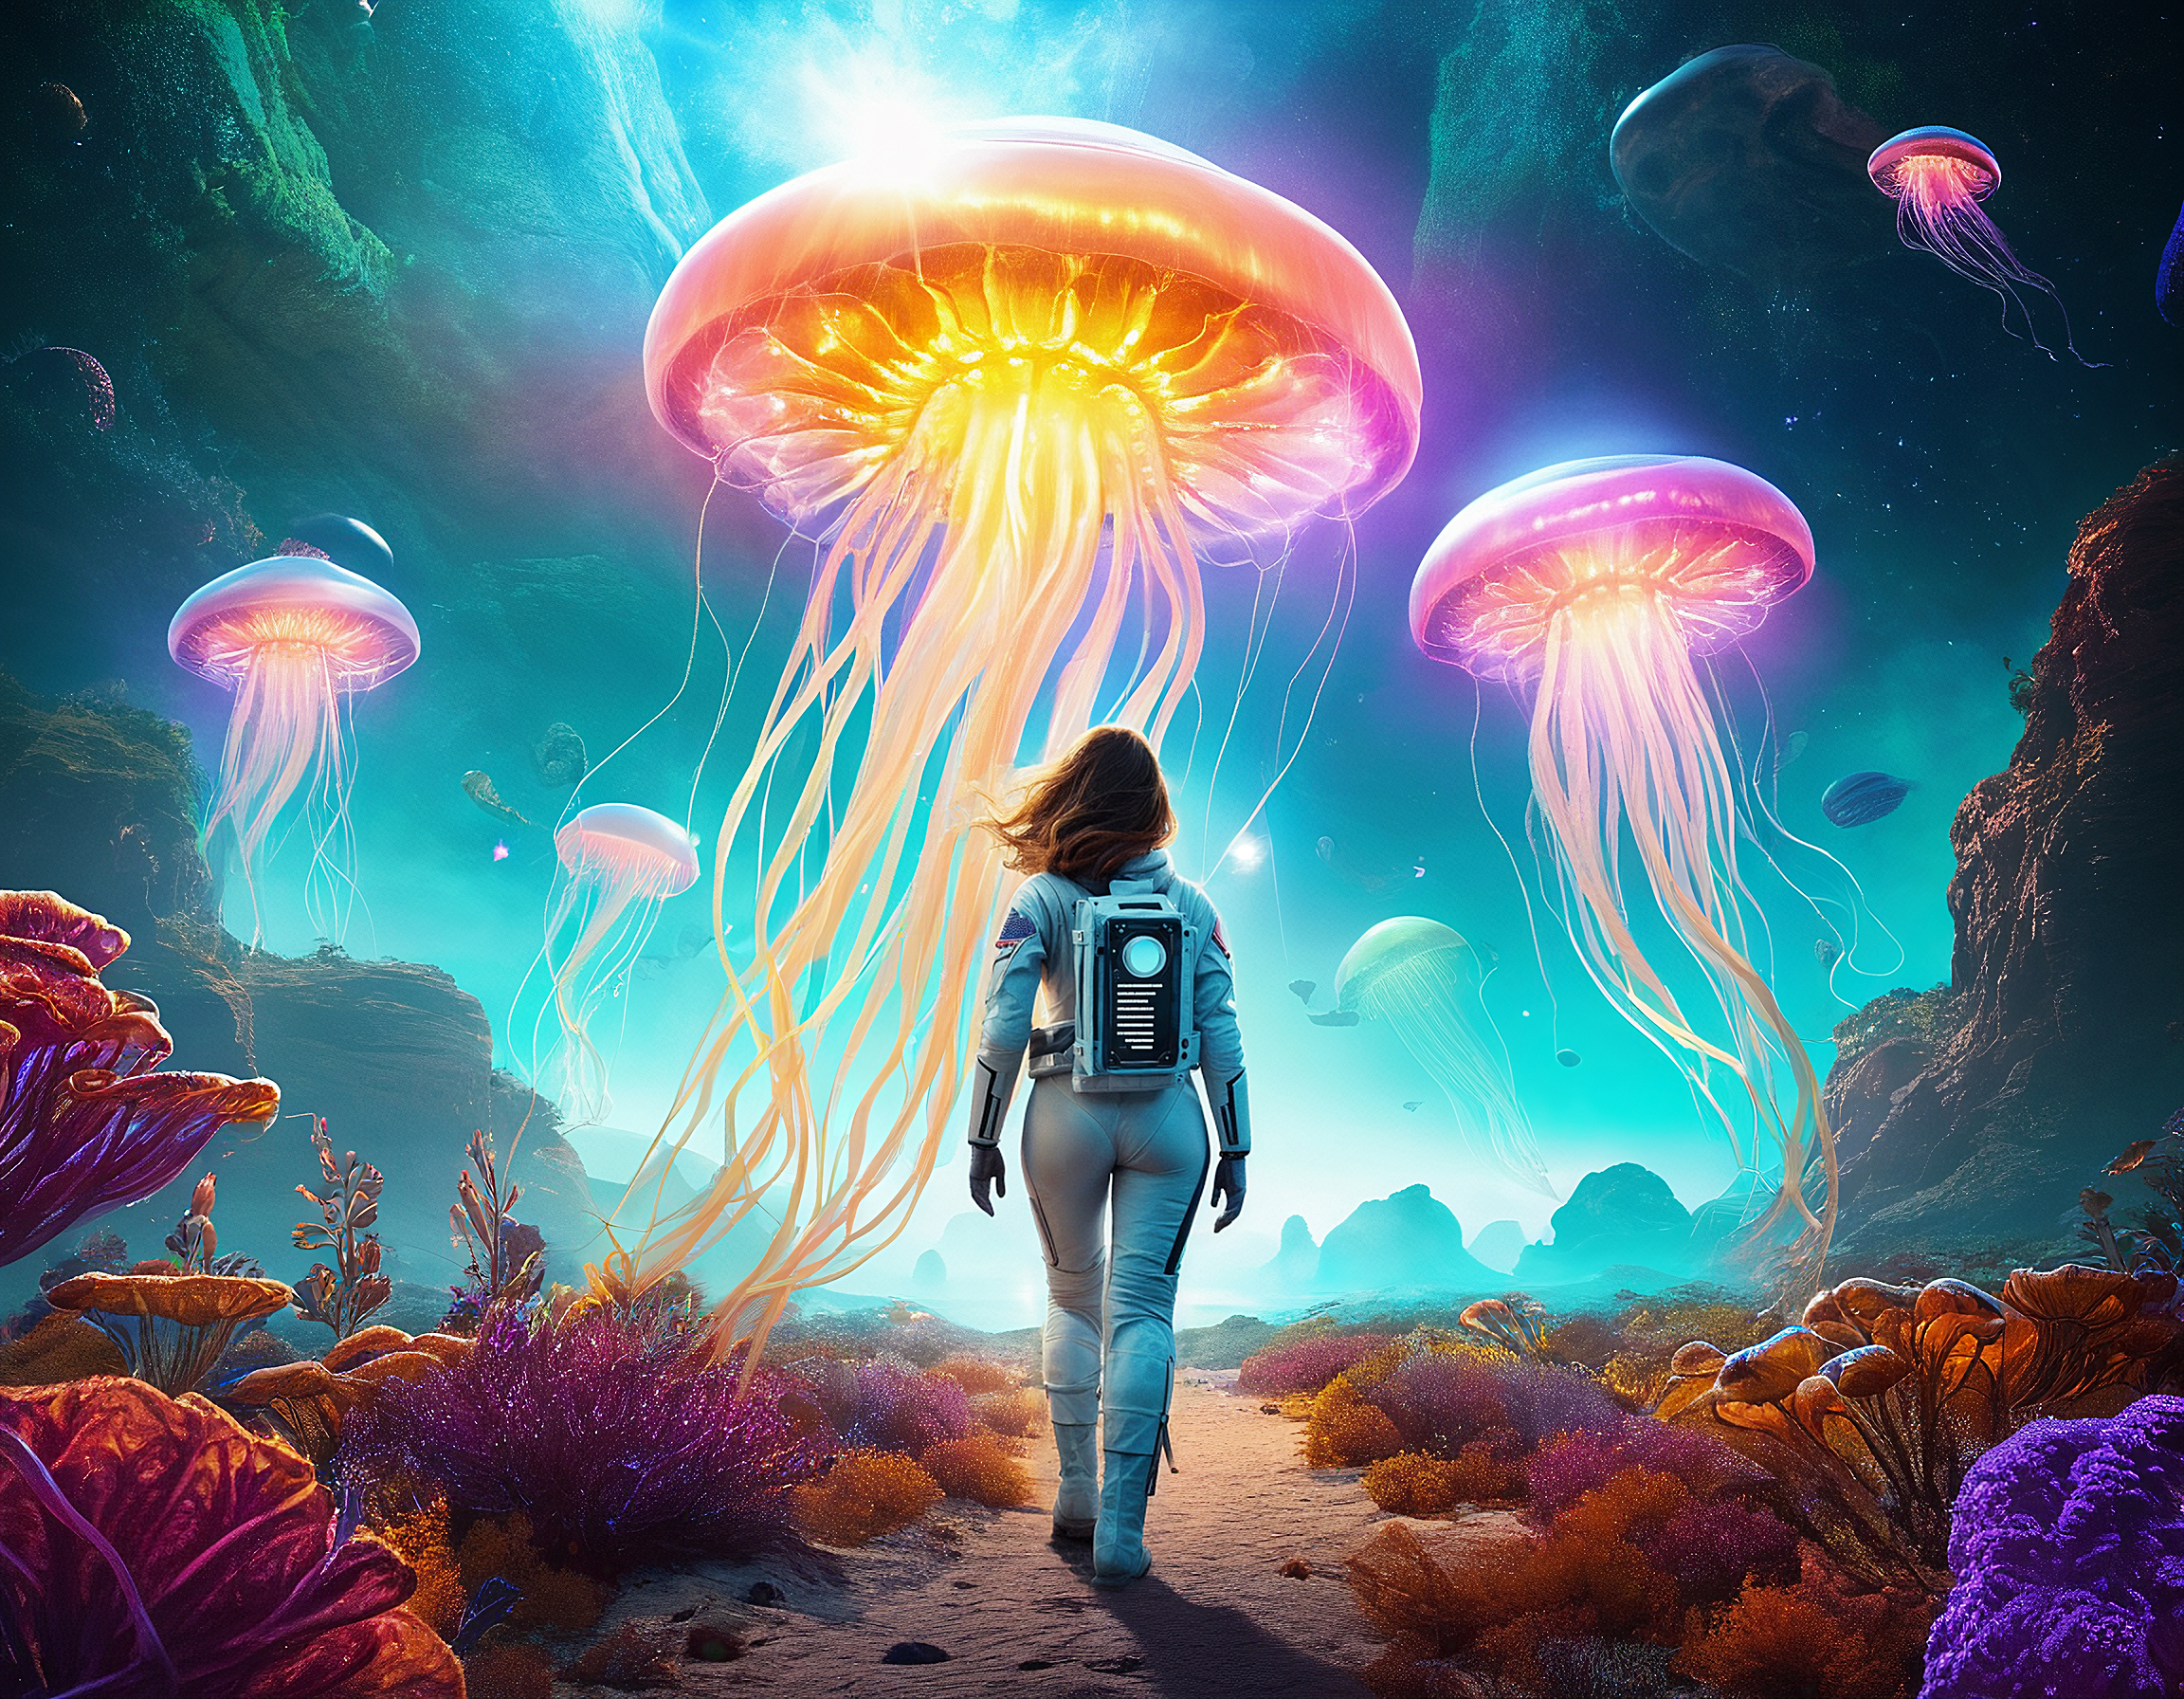 Woman exploring a fantasy world with giant jellyfish and colorful mushrooms.